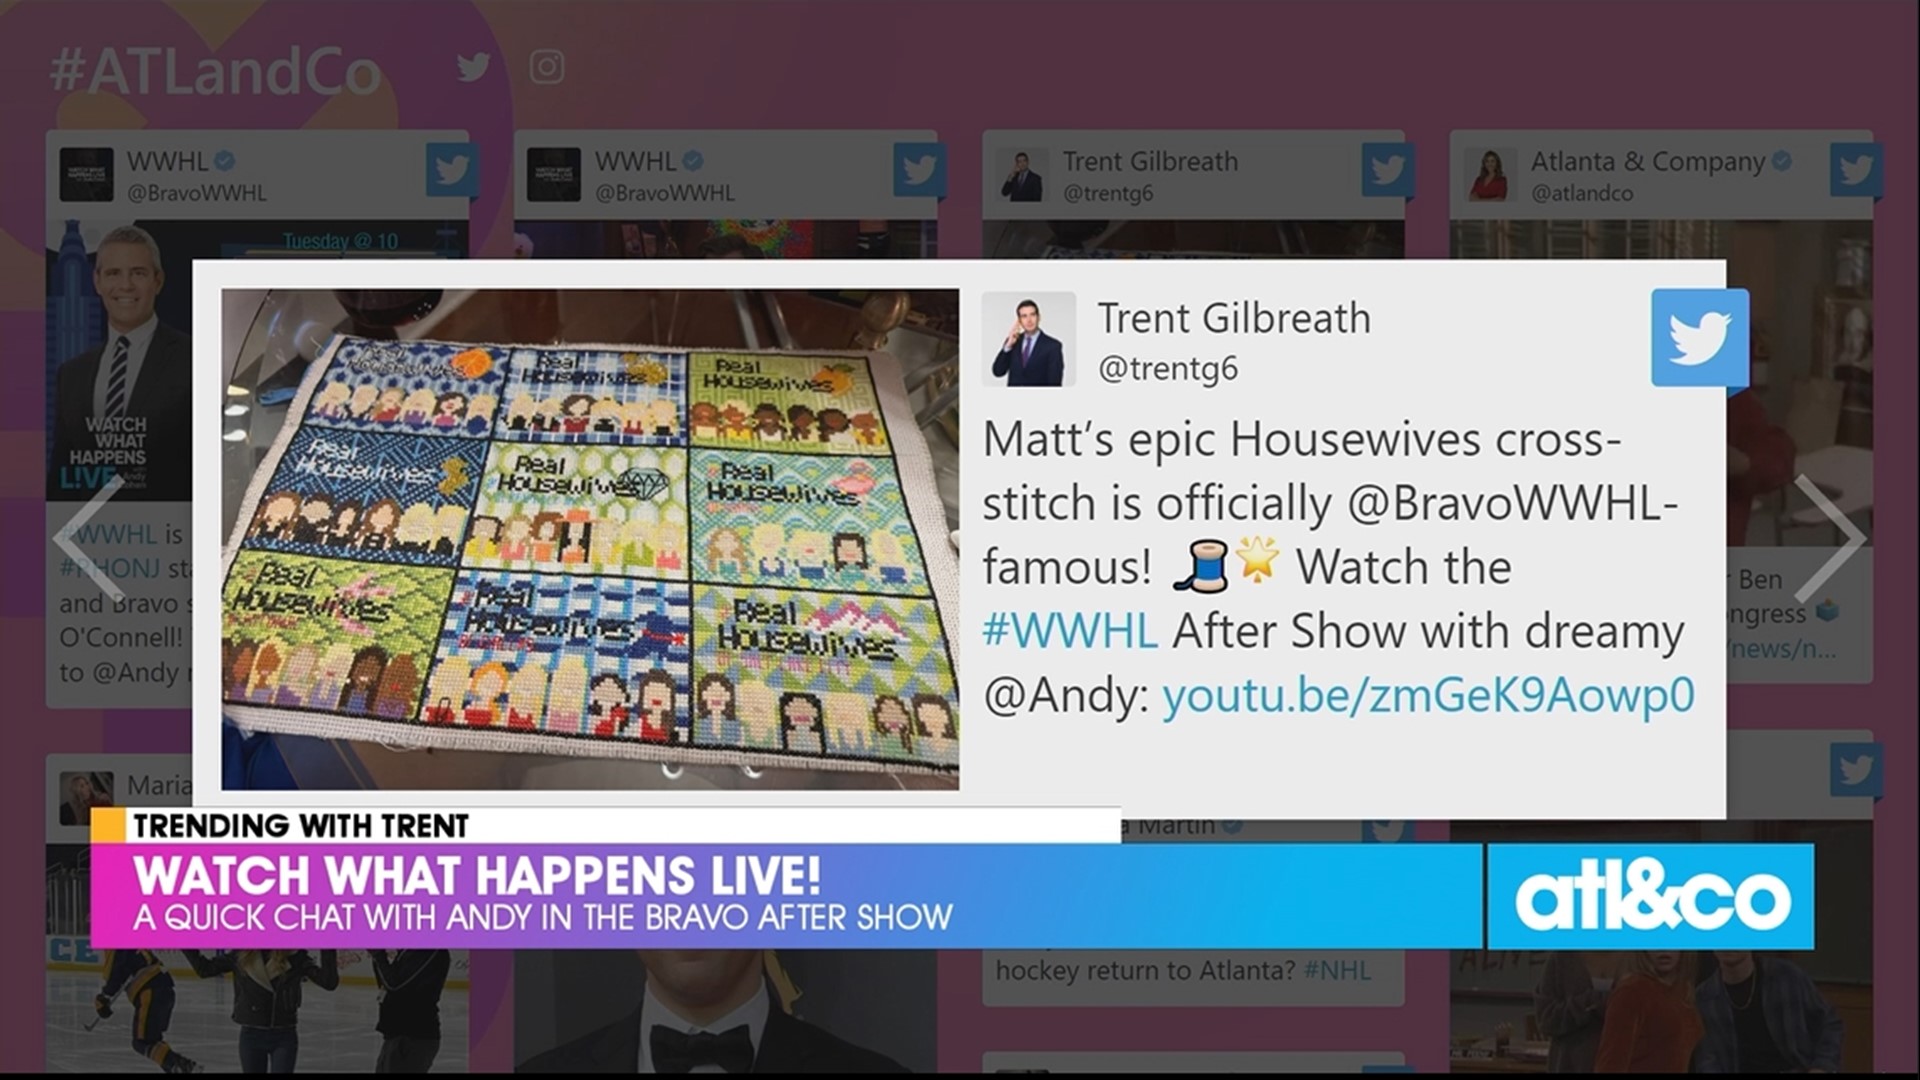 Trent got to say hi to one of his broadcasting idols Andy Cohen on 'Watch What Happens Live'